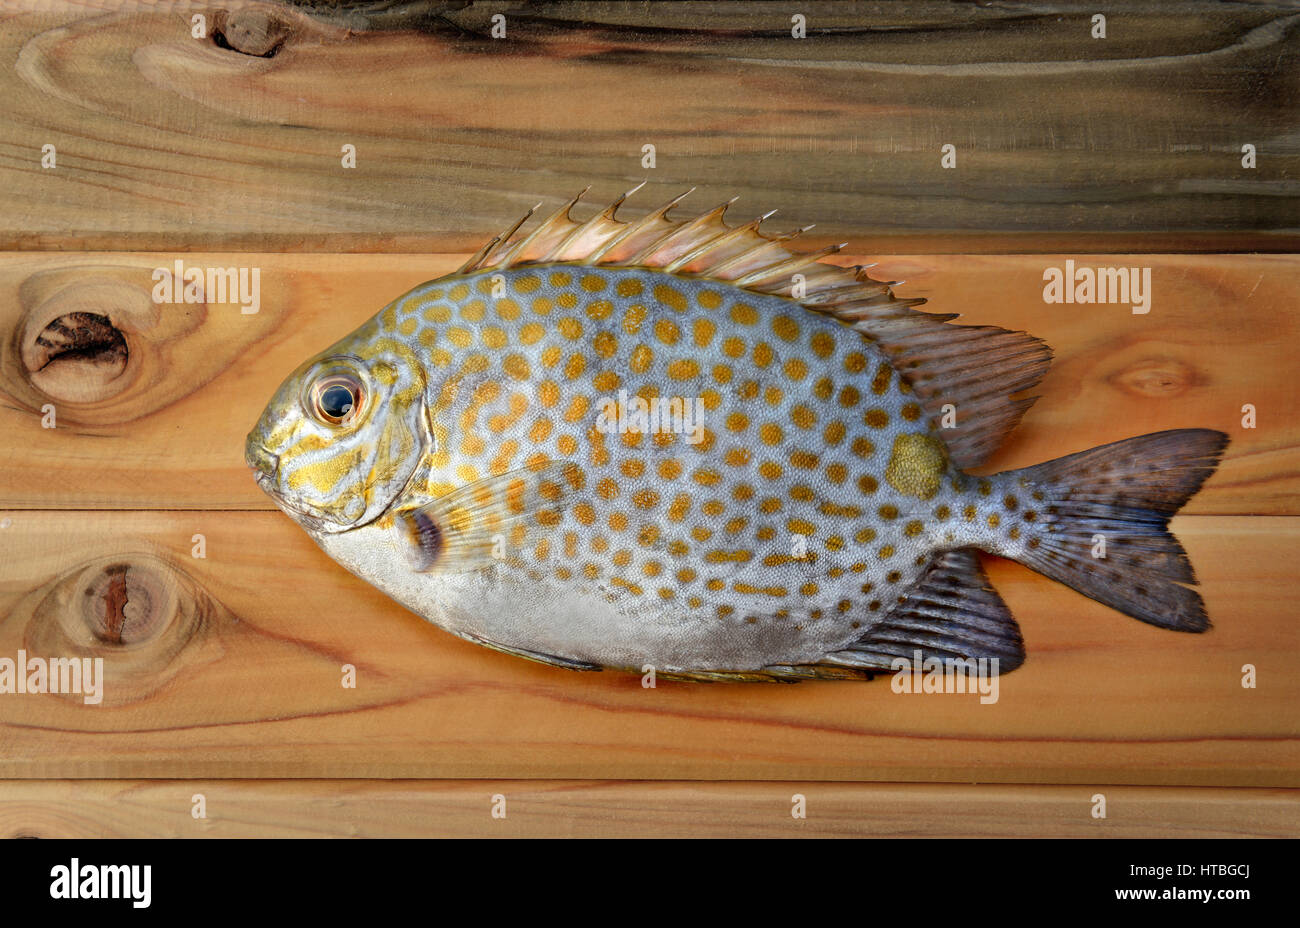 Fresh Siganus guttatus fish from fishery market for cooking it's good kind of seafood photo in outdoor sunlight Stock Photo